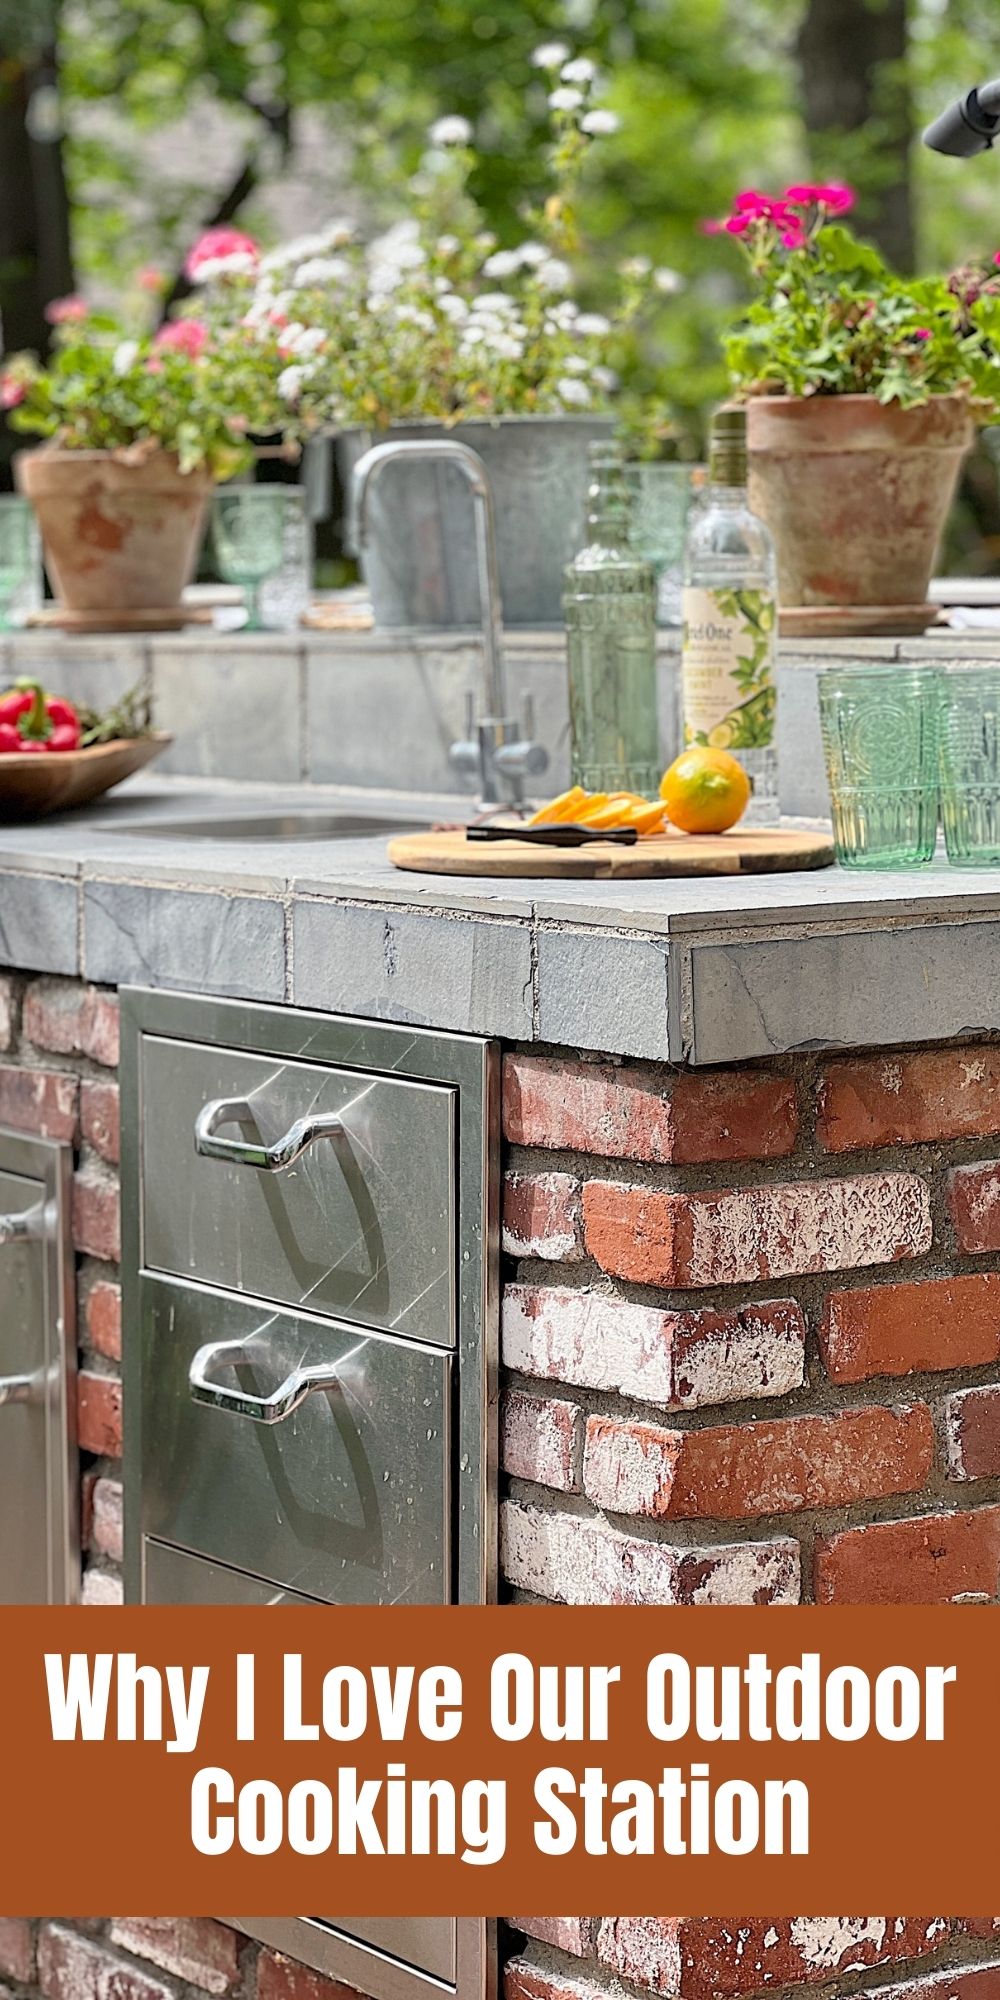 With summer just around the corner, now is the perfect time to get everything ready outside for our outdoor cooking station and entertaining.